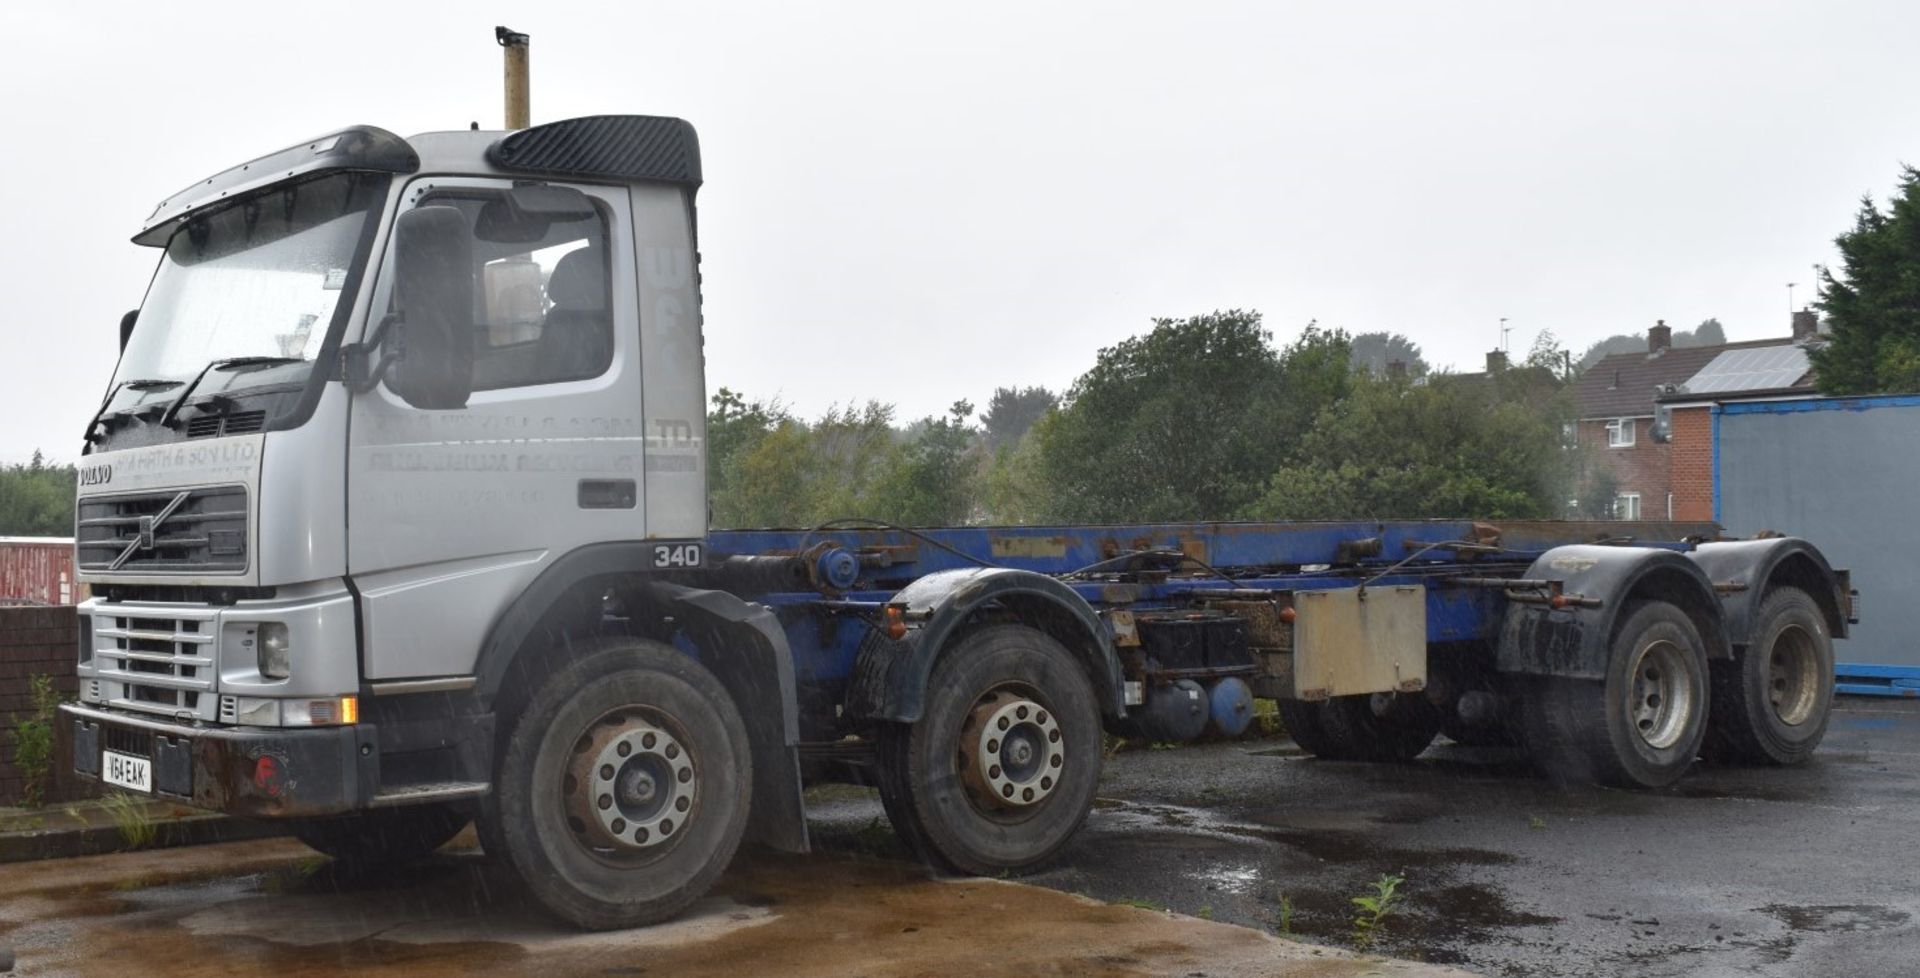 1 x Volvo 340 Plant Lorry With Tipper Chasis and Fitted Winch - CL547 - Location: South Yorkshire. - Image 5 of 25